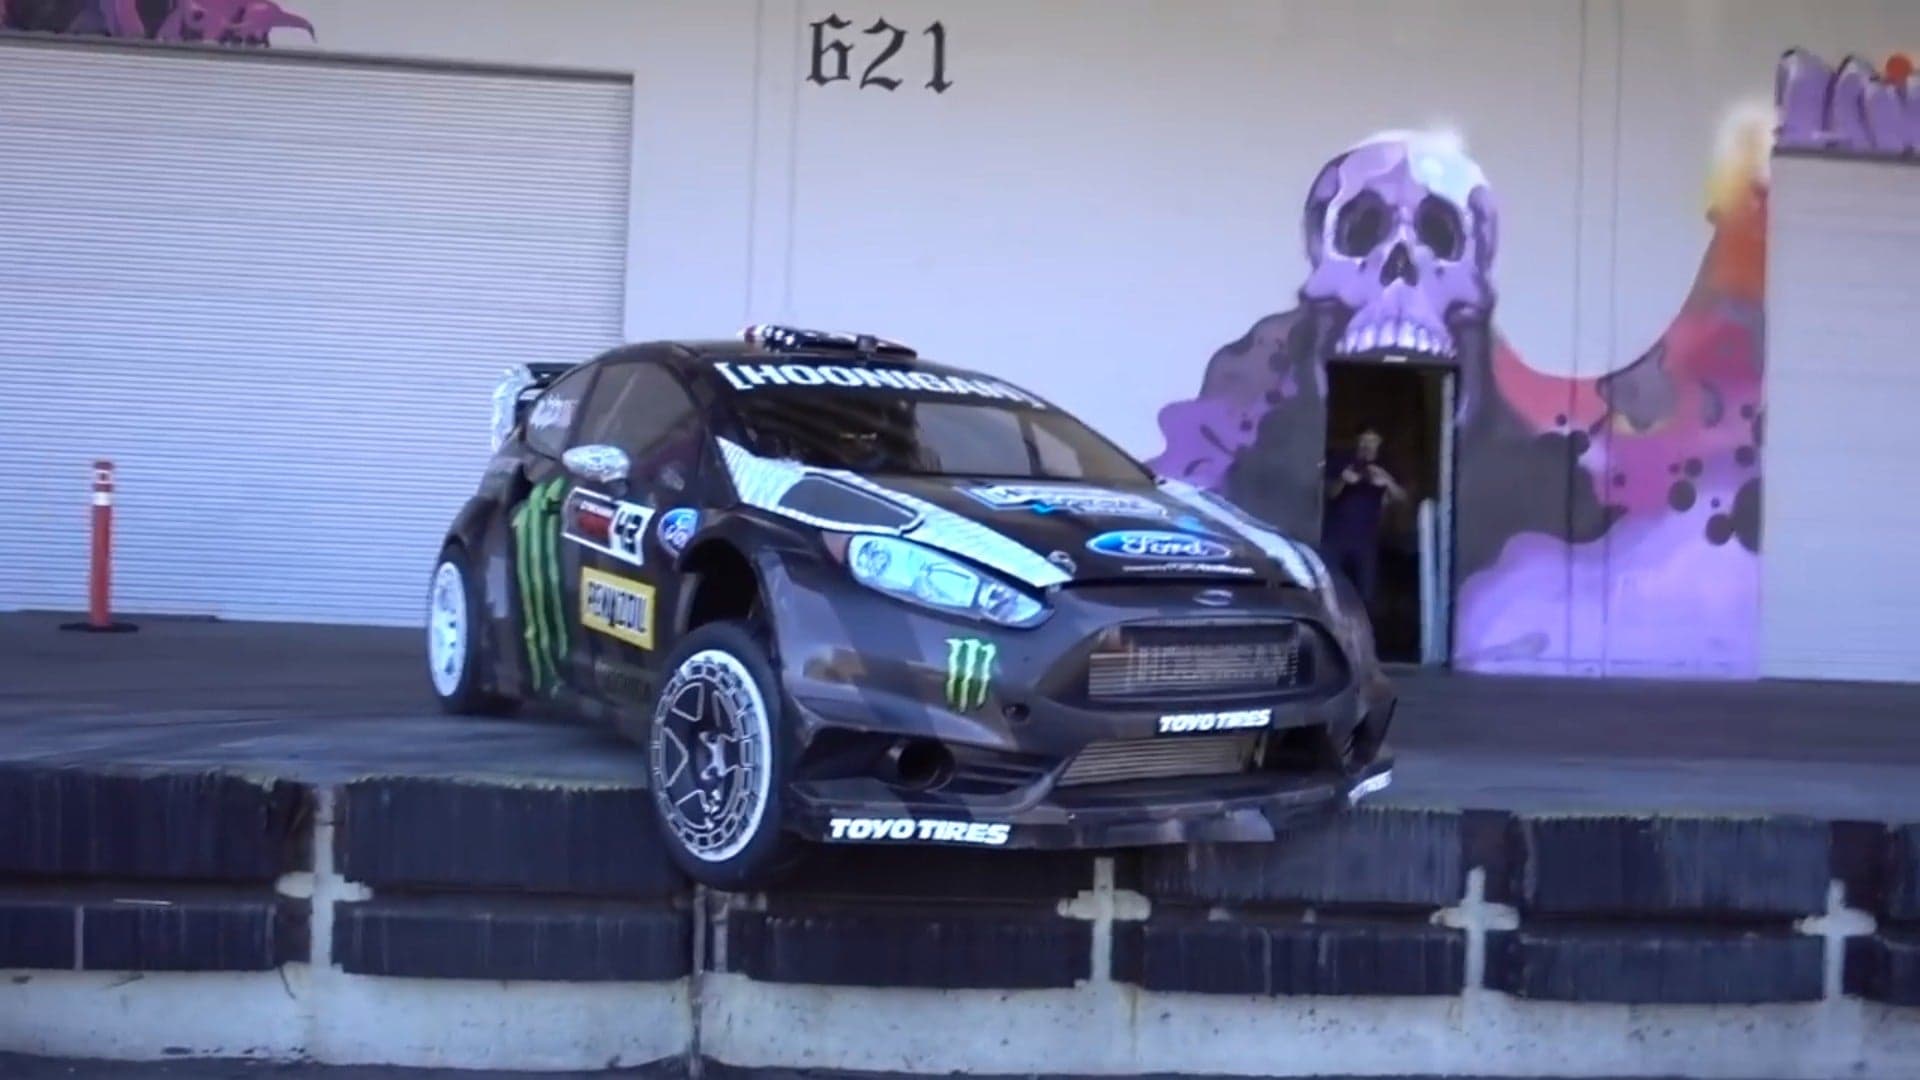 Rally Driver Ken Block Thrashes Around in His Ford Fiesta for Yardkhana